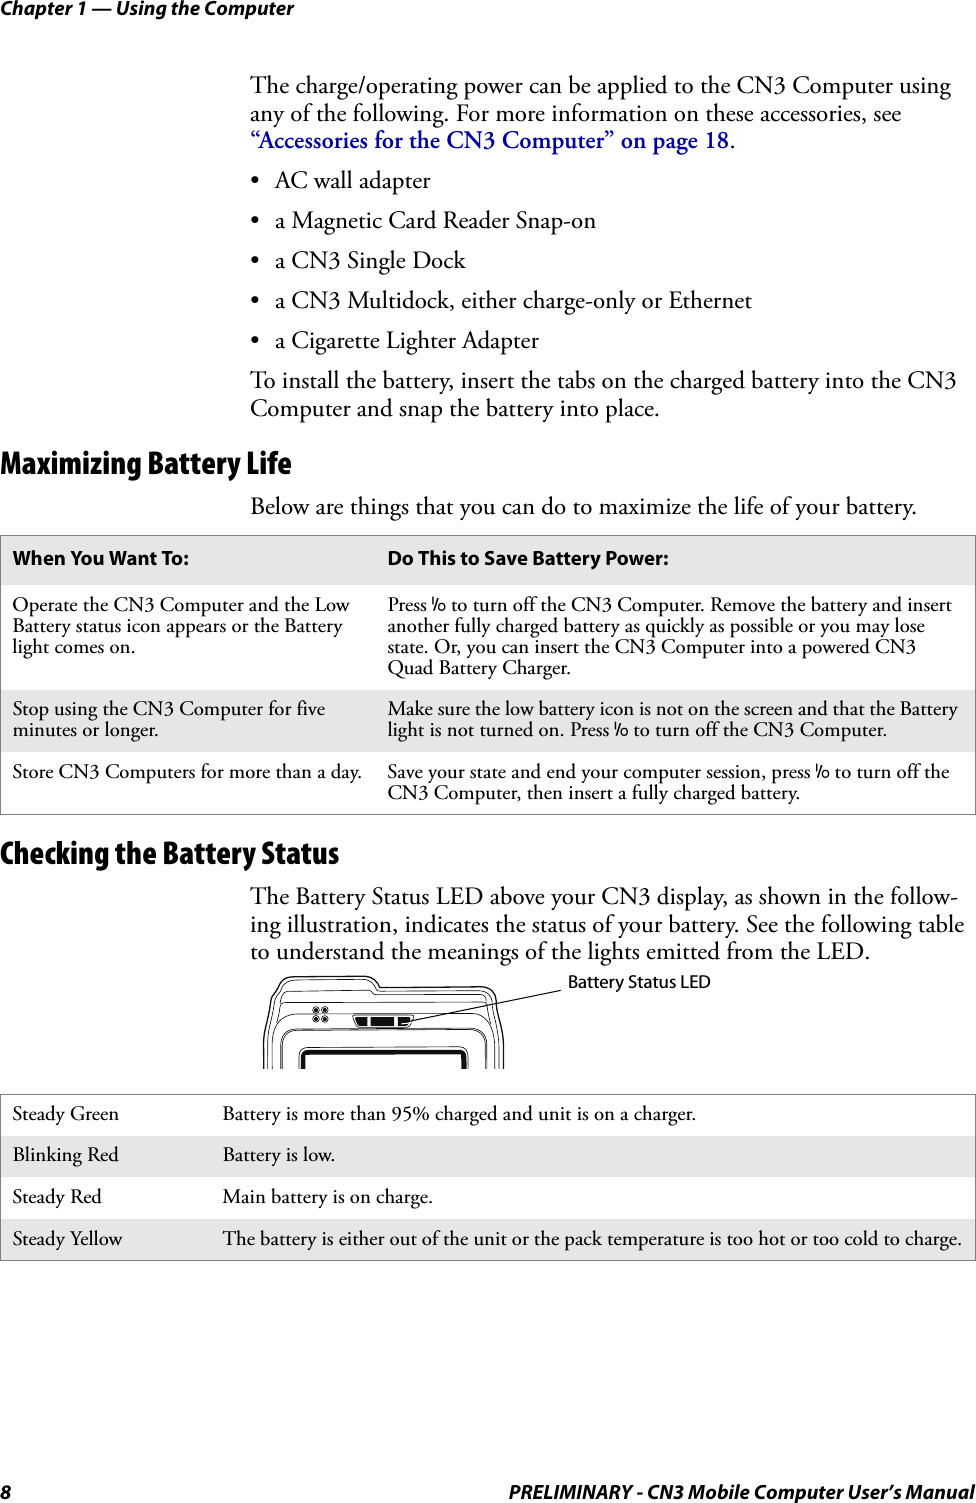 Chapter 1 — Using the Computer8 PRELIMINARY - CN3 Mobile Computer User’s ManualThe charge/operating power can be applied to the CN3 Computer using any of the following. For more information on these accessories, see “Accessories for the CN3 Computer” on page 18.• AC wall adapter• a Magnetic Card Reader Snap-on• a CN3 Single Dock• a CN3 Multidock, either charge-only or Ethernet• a Cigarette Lighter AdapterTo install the battery, insert the tabs on the charged battery into the CN3 Computer and snap the battery into place.Maximizing Battery LifeBelow are things that you can do to maximize the life of your battery.Checking the Battery StatusThe Battery Status LED above your CN3 display, as shown in the follow-ing illustration, indicates the status of your battery. See the following table to understand the meanings of the lights emitted from the LED.When You Want To: Do This to Save Battery Power:Operate the CN3 Computer and the Low Battery status icon appears or the Battery light comes on.Press I to turn off the CN3 Computer. Remove the battery and insert another fully charged battery as quickly as possible or you may lose state. Or, you can insert the CN3 Computer into a powered CN3 Quad Battery Charger.Stop using the CN3 Computer for five minutes or longer.Make sure the low battery icon is not on the screen and that the Battery light is not turned on. Press I to turn off the CN3 Computer.Store CN3 Computers for more than a day. Save your state and end your computer session, press I to turn off the CN3 Computer, then insert a fully charged battery.Steady Green Battery is more than 95% charged and unit is on a charger.Blinking Red Battery is low.Steady Red Main battery is on charge.Steady Yellow The battery is either out of the unit or the pack temperature is too hot or too cold to charge.Battery Status LED